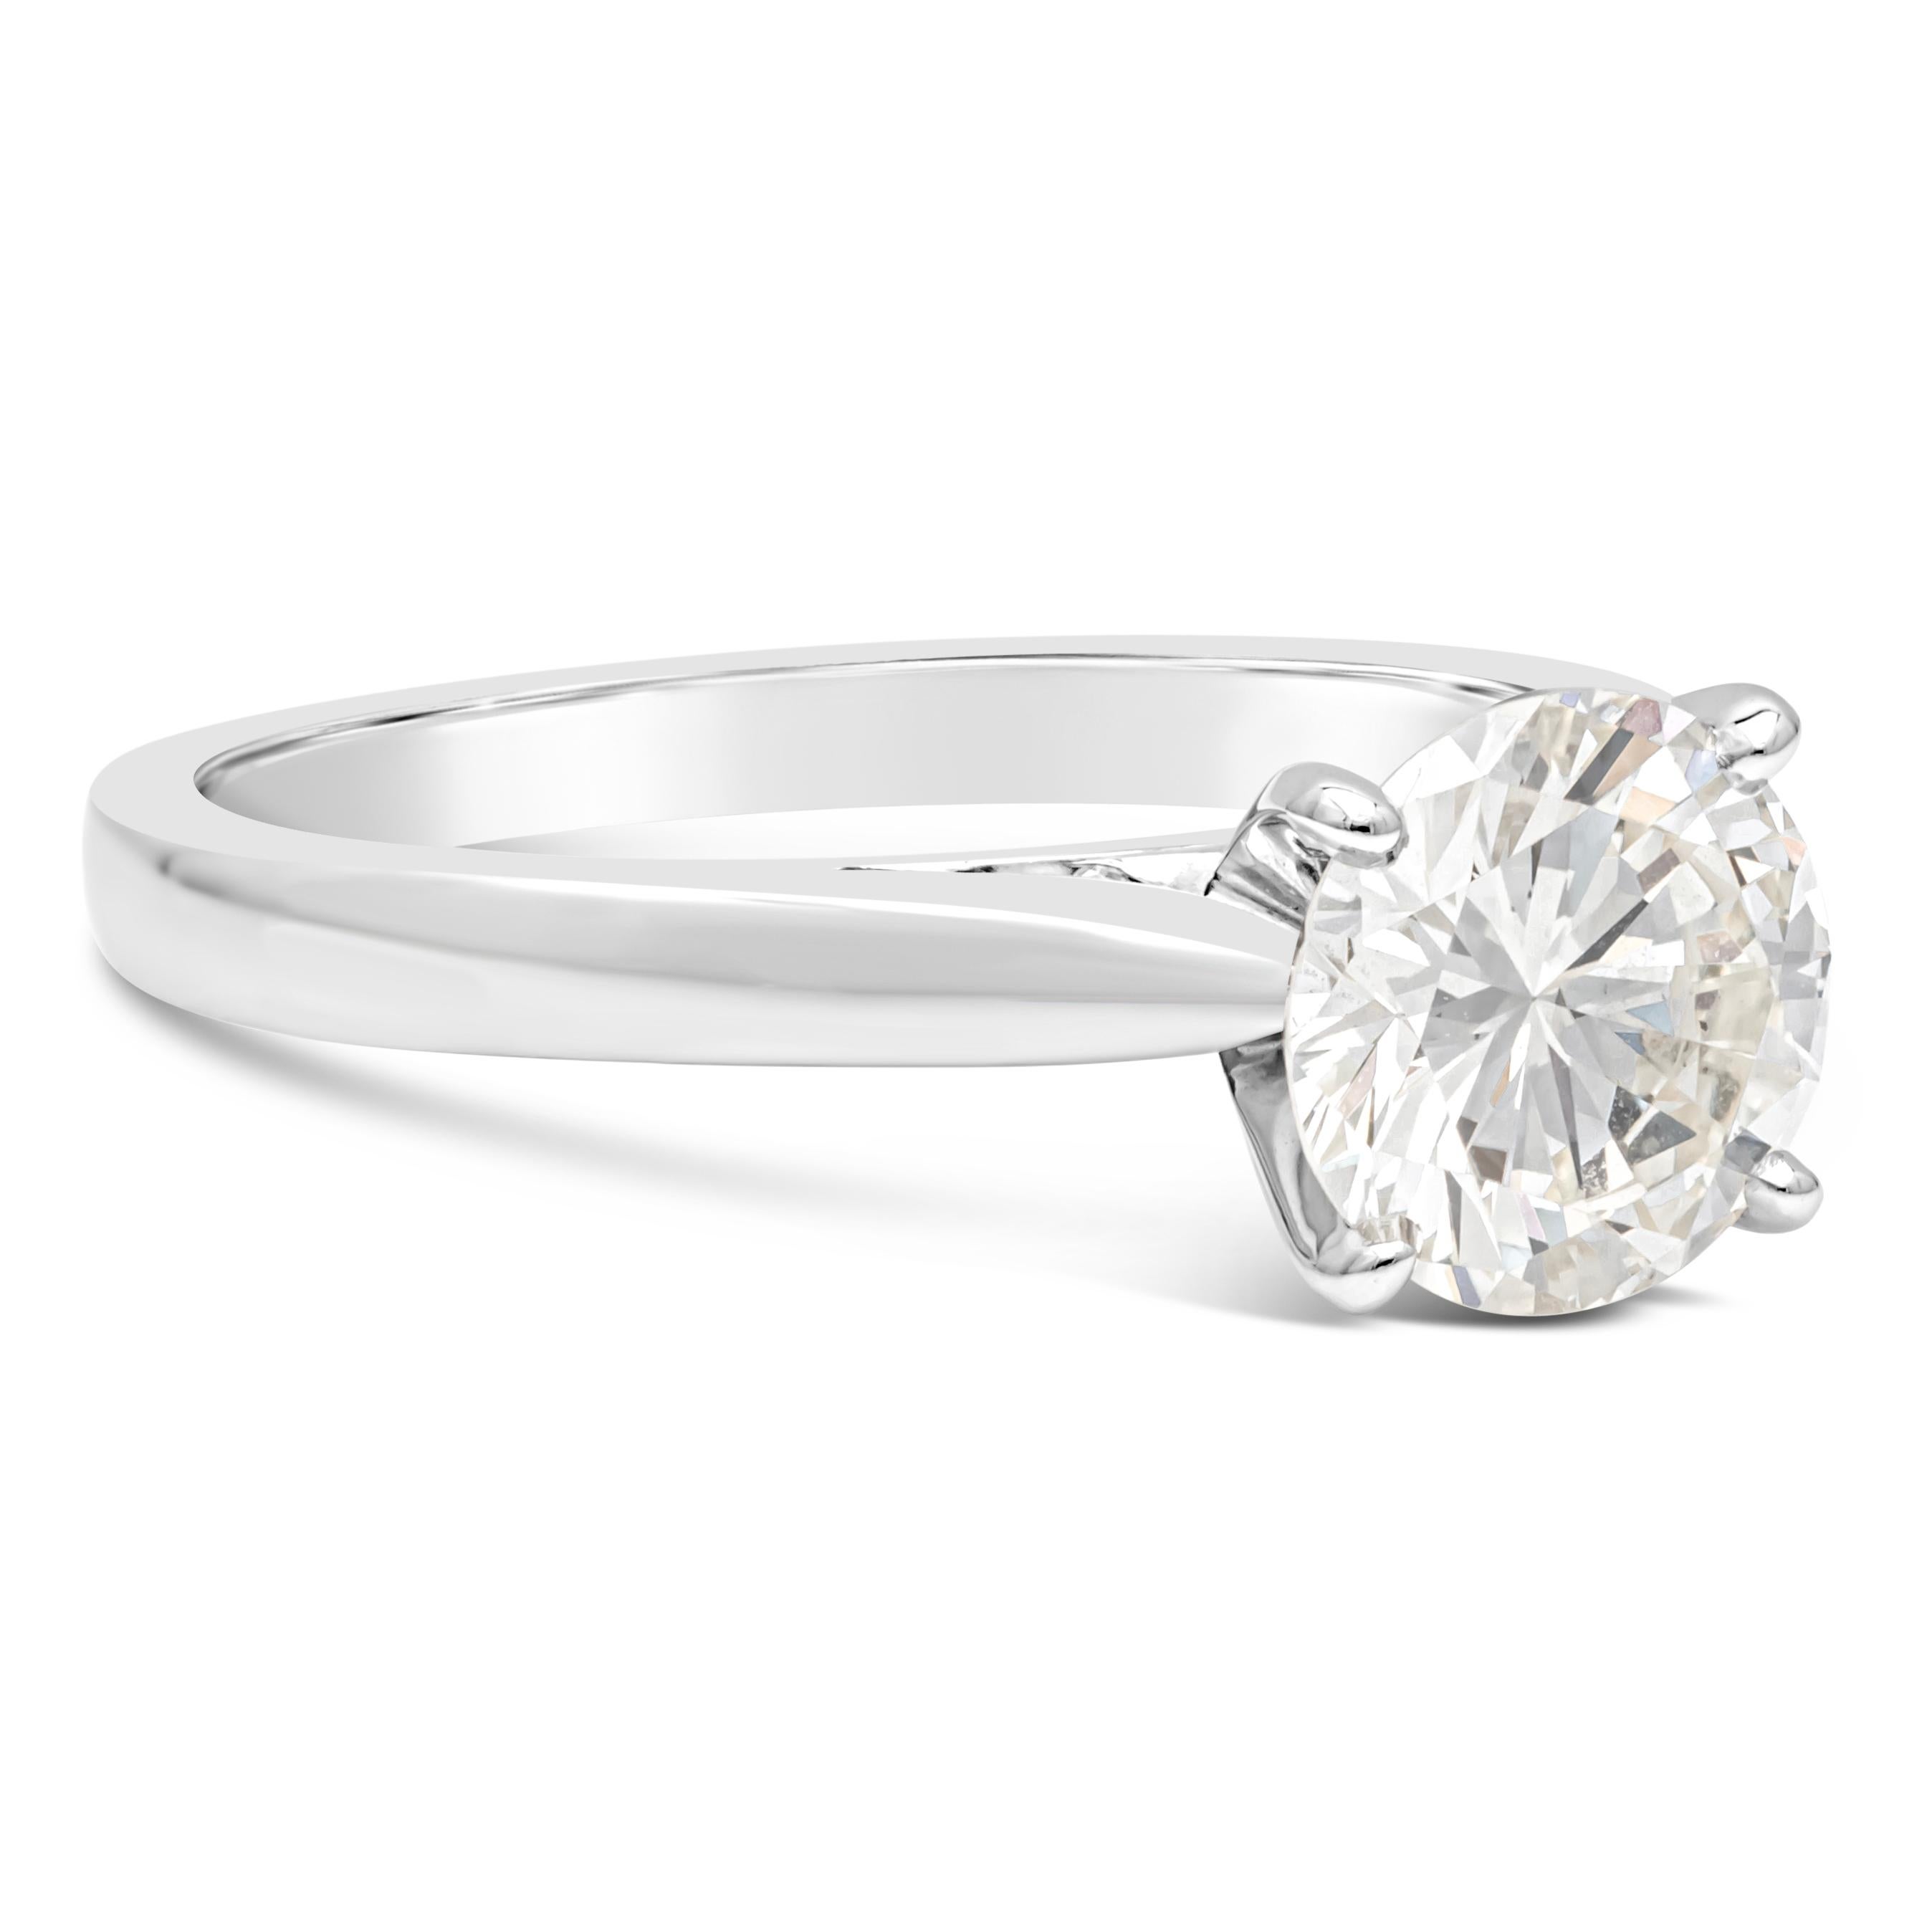 Contemporary Roman Malakov 1.30 Carat Total Brilliant Round Diamond Solitaire Engagement Ring For Sale